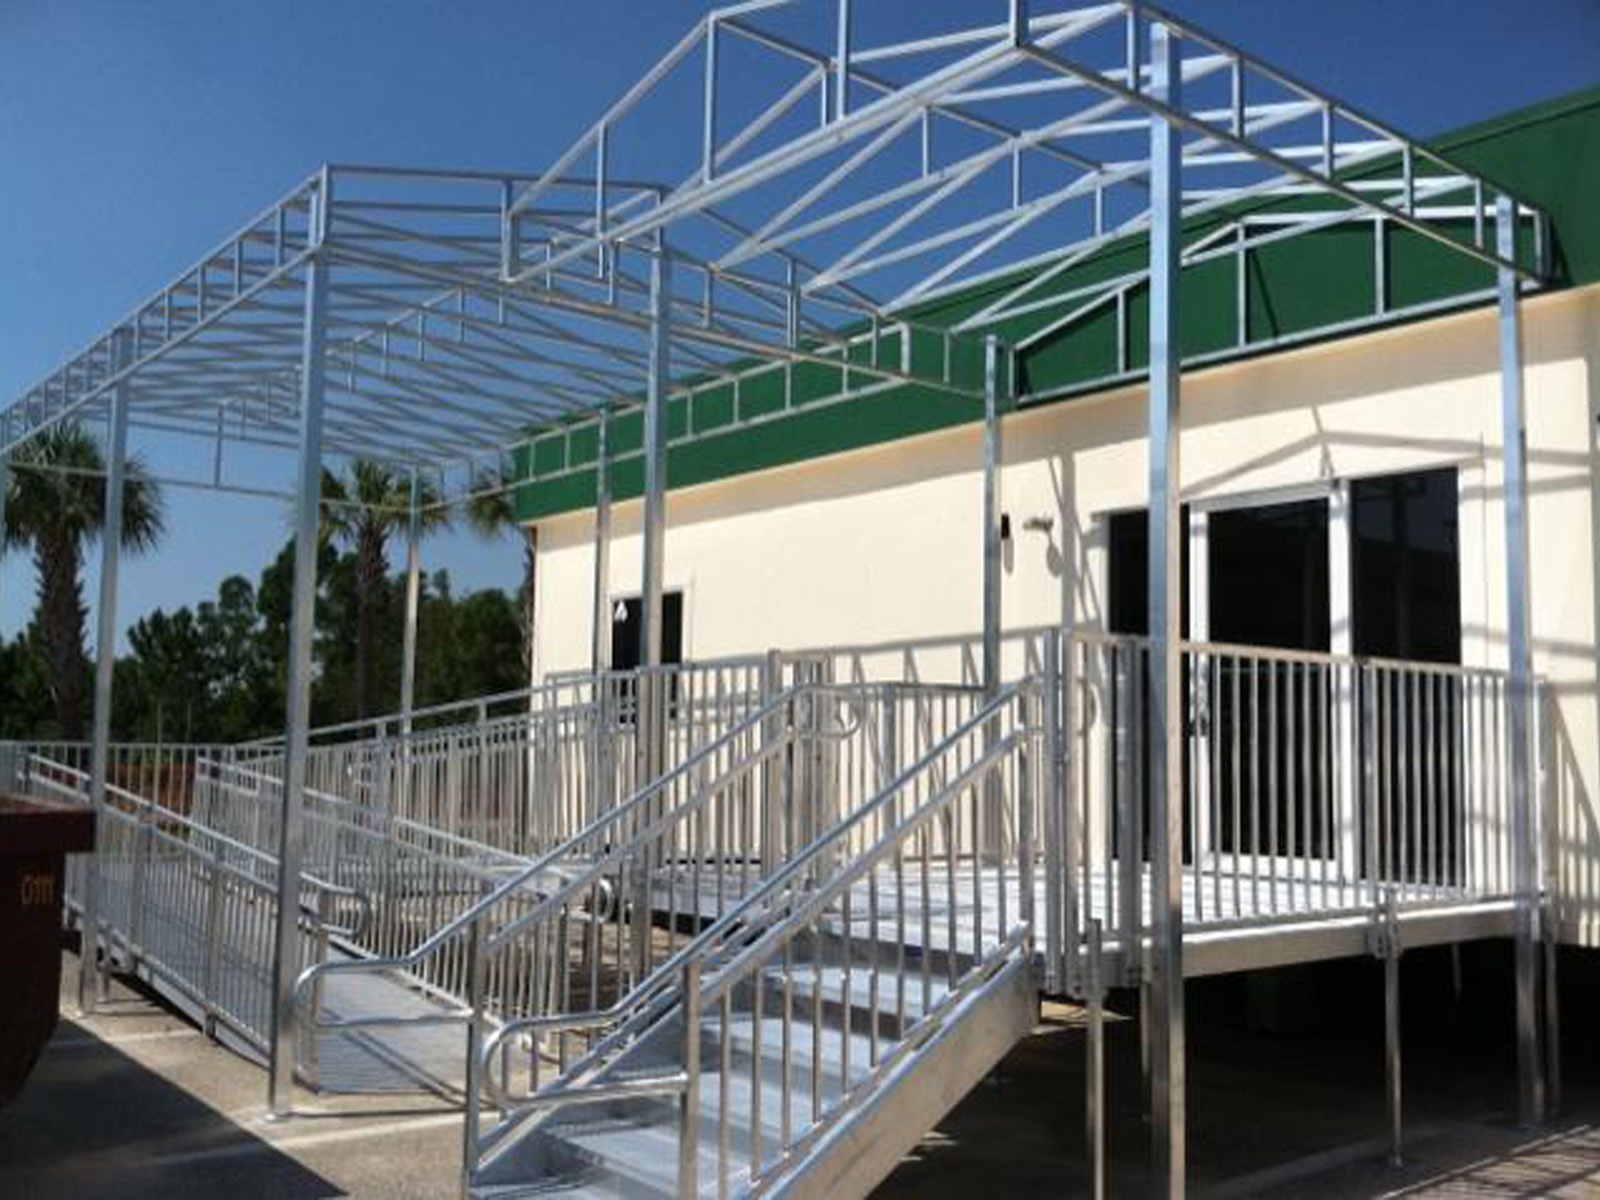 aluminum entryway system with ramp and stairs